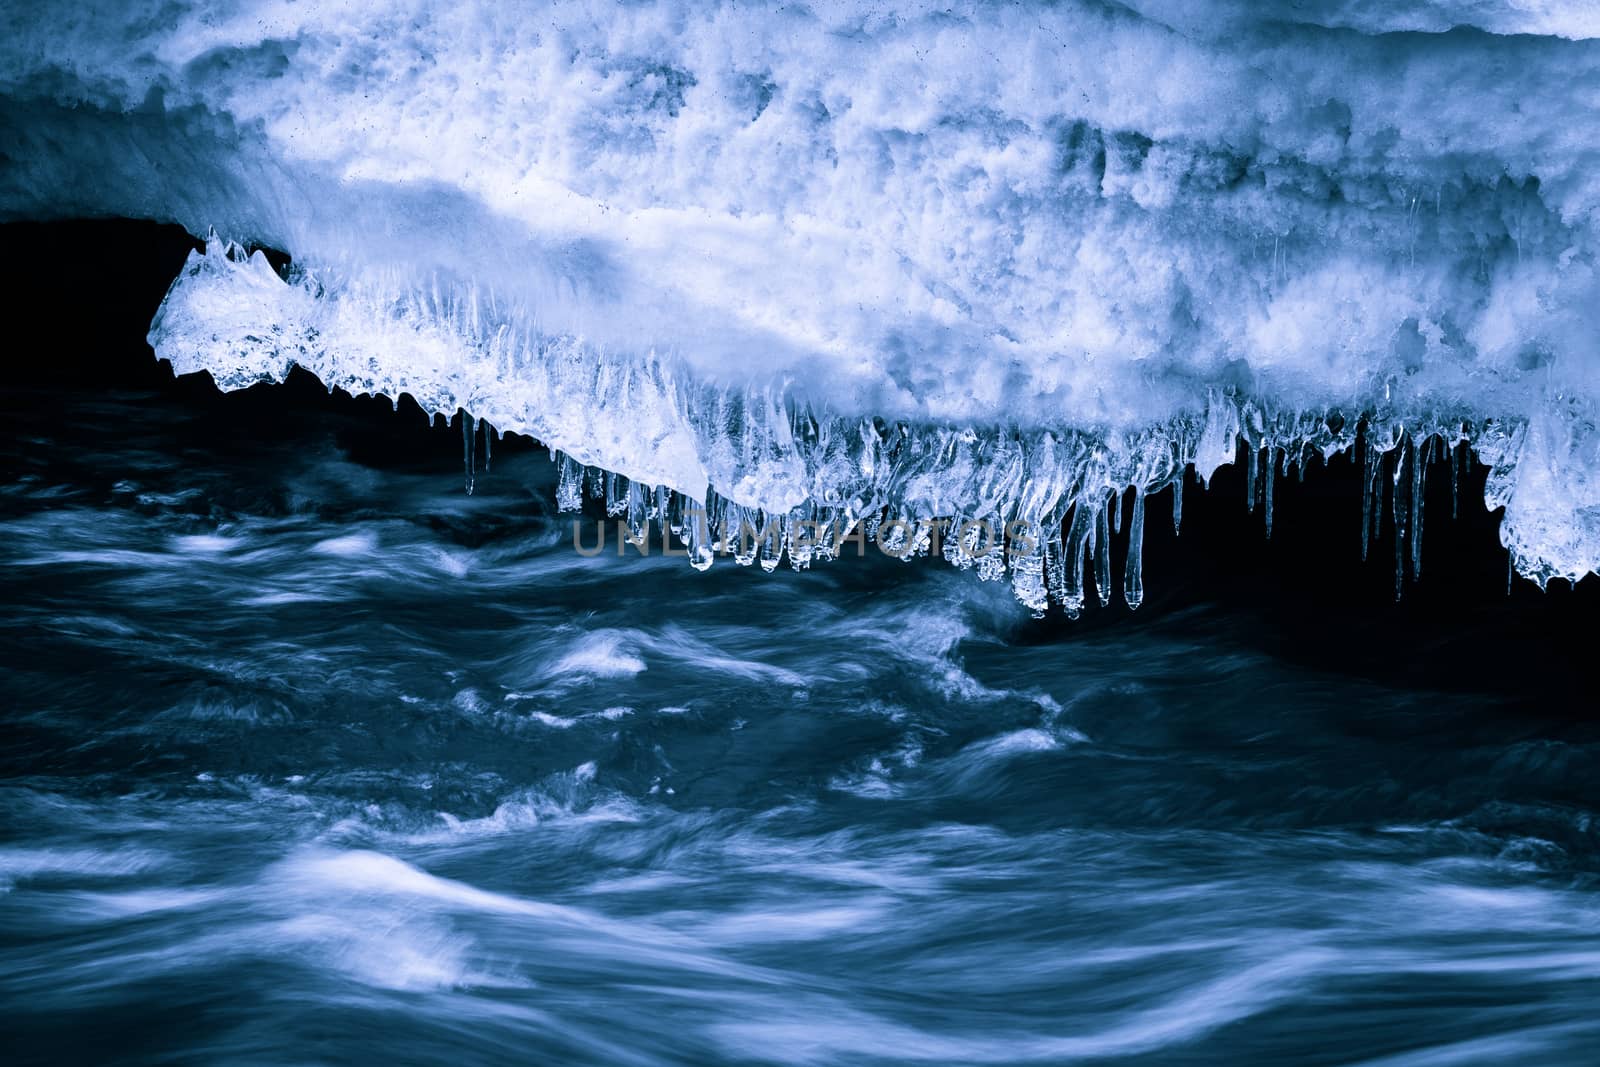 Flowing water beneath the ice. The picture shows blue tones.